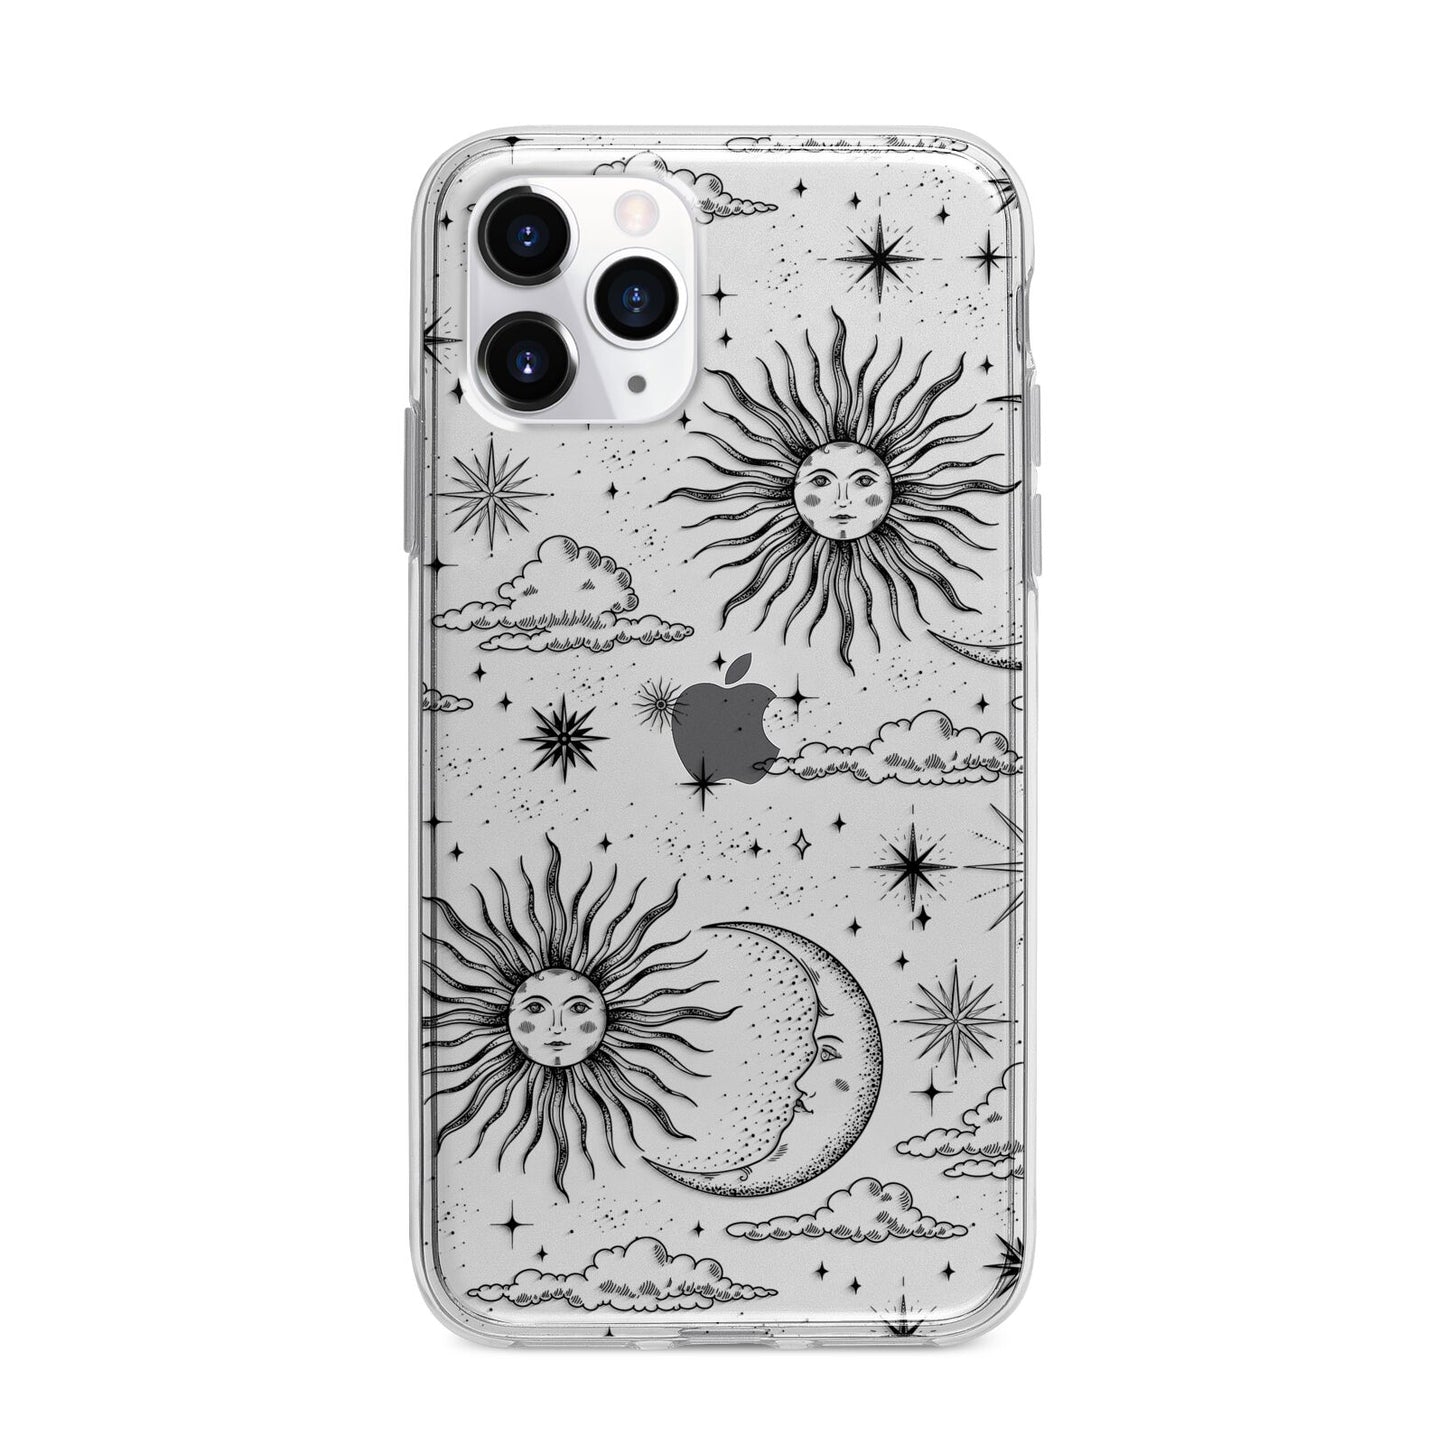 Celestial Suns Clouds Apple iPhone 11 Pro Max in Silver with Bumper Case